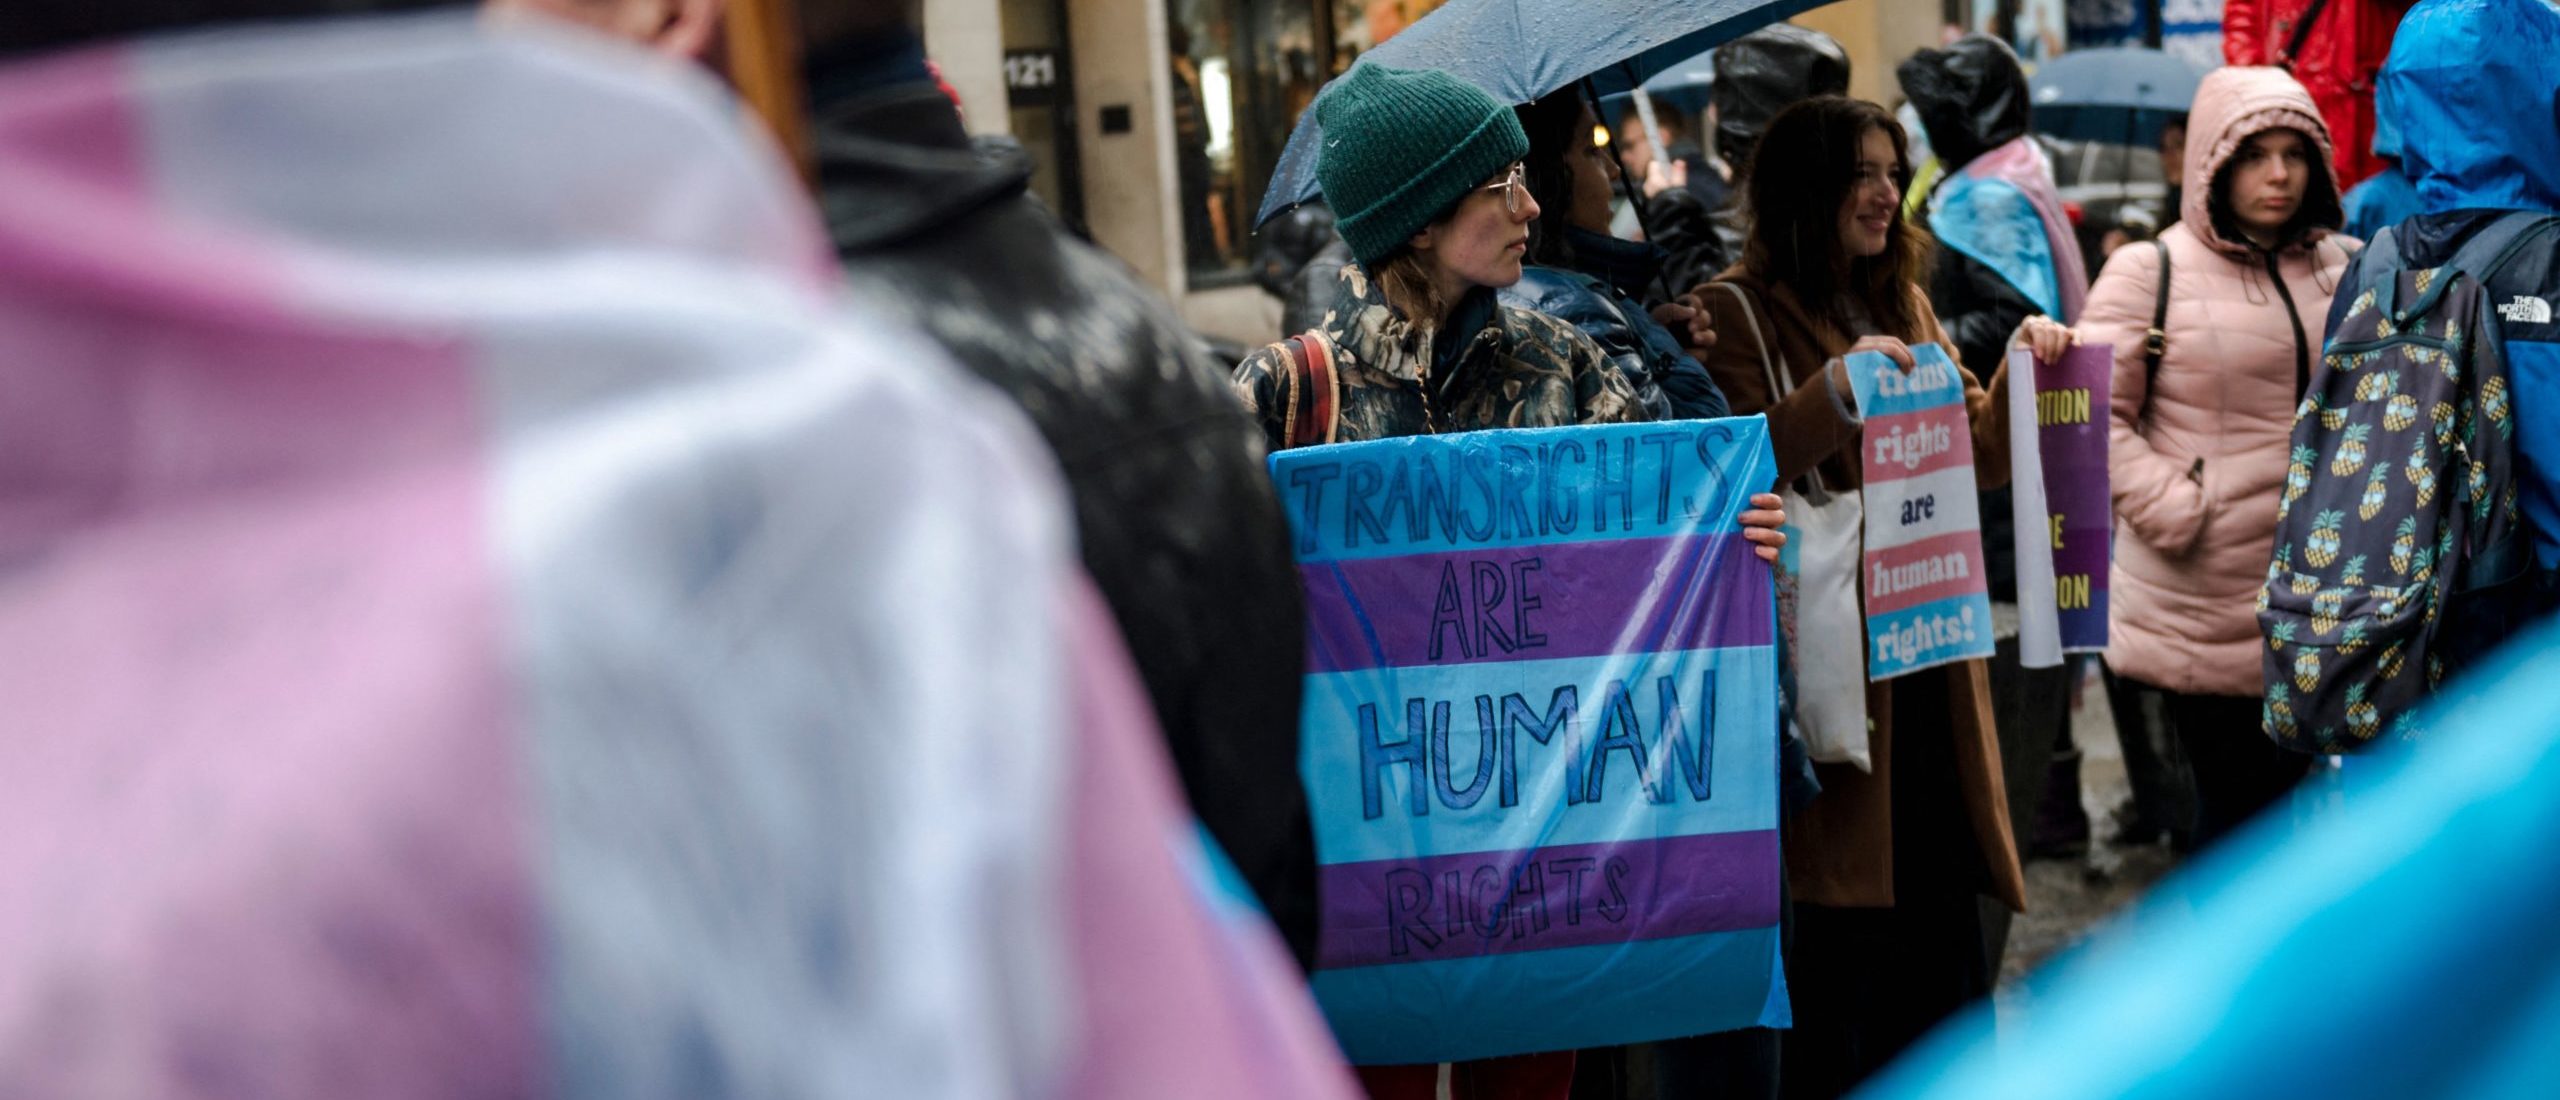 A person holds a sign reading "Trans Rights are Human Rights" as LGBTQ activists protest on March 17, 2023, in front of the US Consulate in Montreal, Canada, calling for transgender and non-binary people be admitted into Canada. - According to police services, some 200 people gathered in the rain to show support for the trans community in the United States. (Photo by ANDREJ IVANOV / AFP) (Photo by ANDREJ IVANOV/AFP via Getty Images)